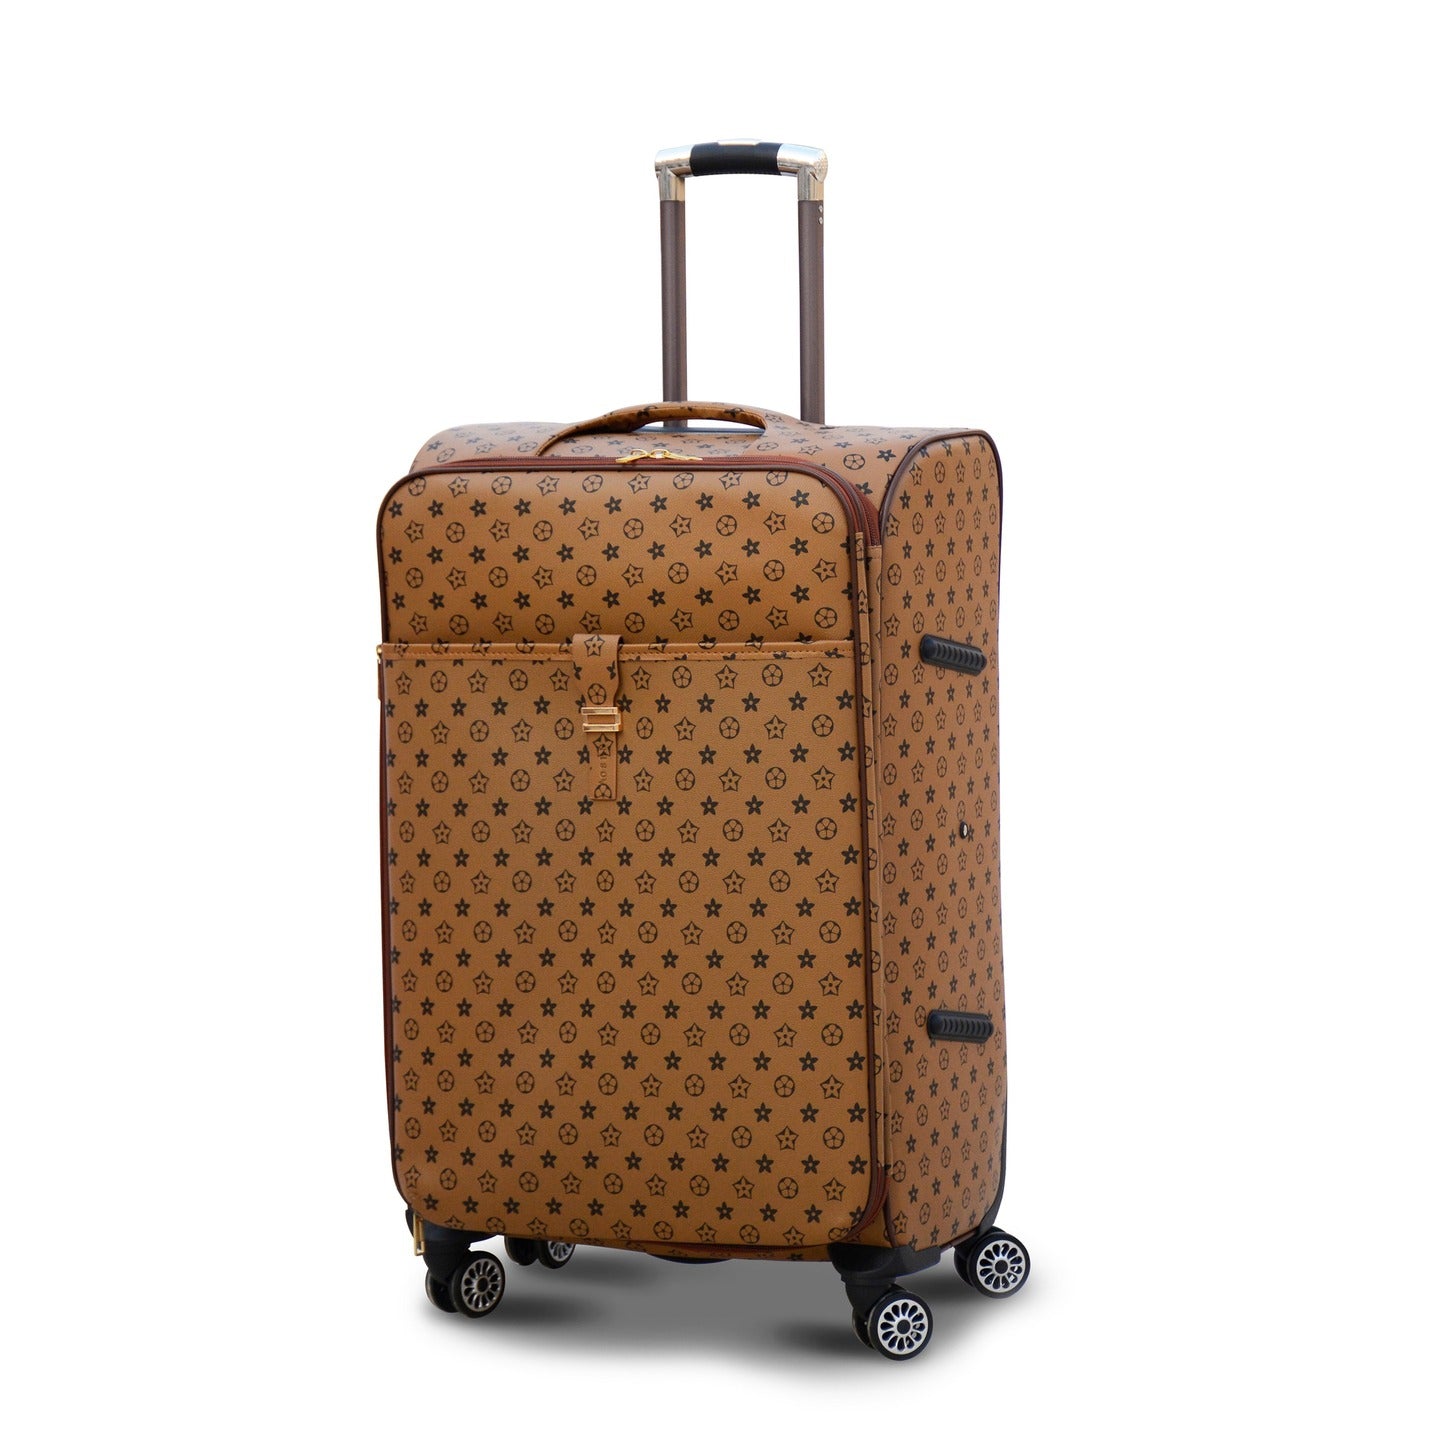 28" Light Brown Colour LVR PU Leather Luggage Lightweight Soft Material Trolley Bag with Spinner Wheel Zaappy.com